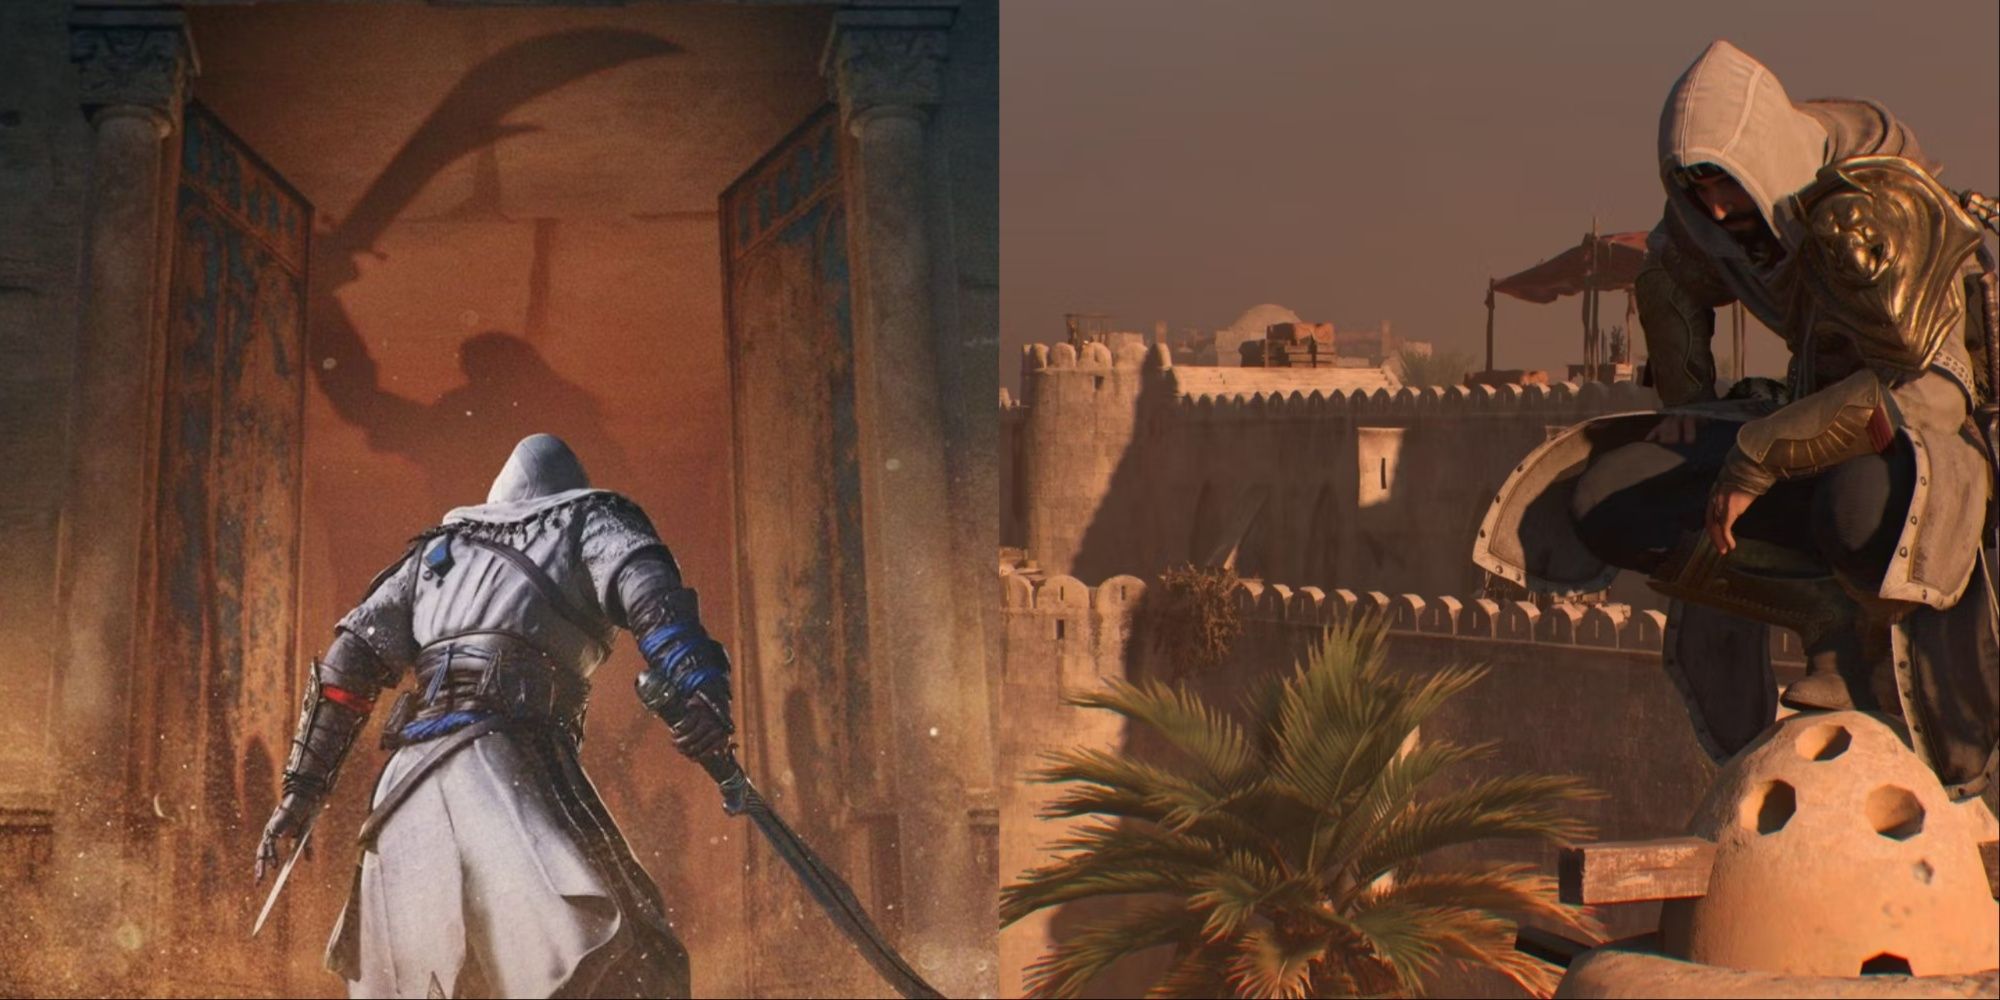 split image basim approaching open gates and enemy, basim perched high above the streets assassins creed mirage